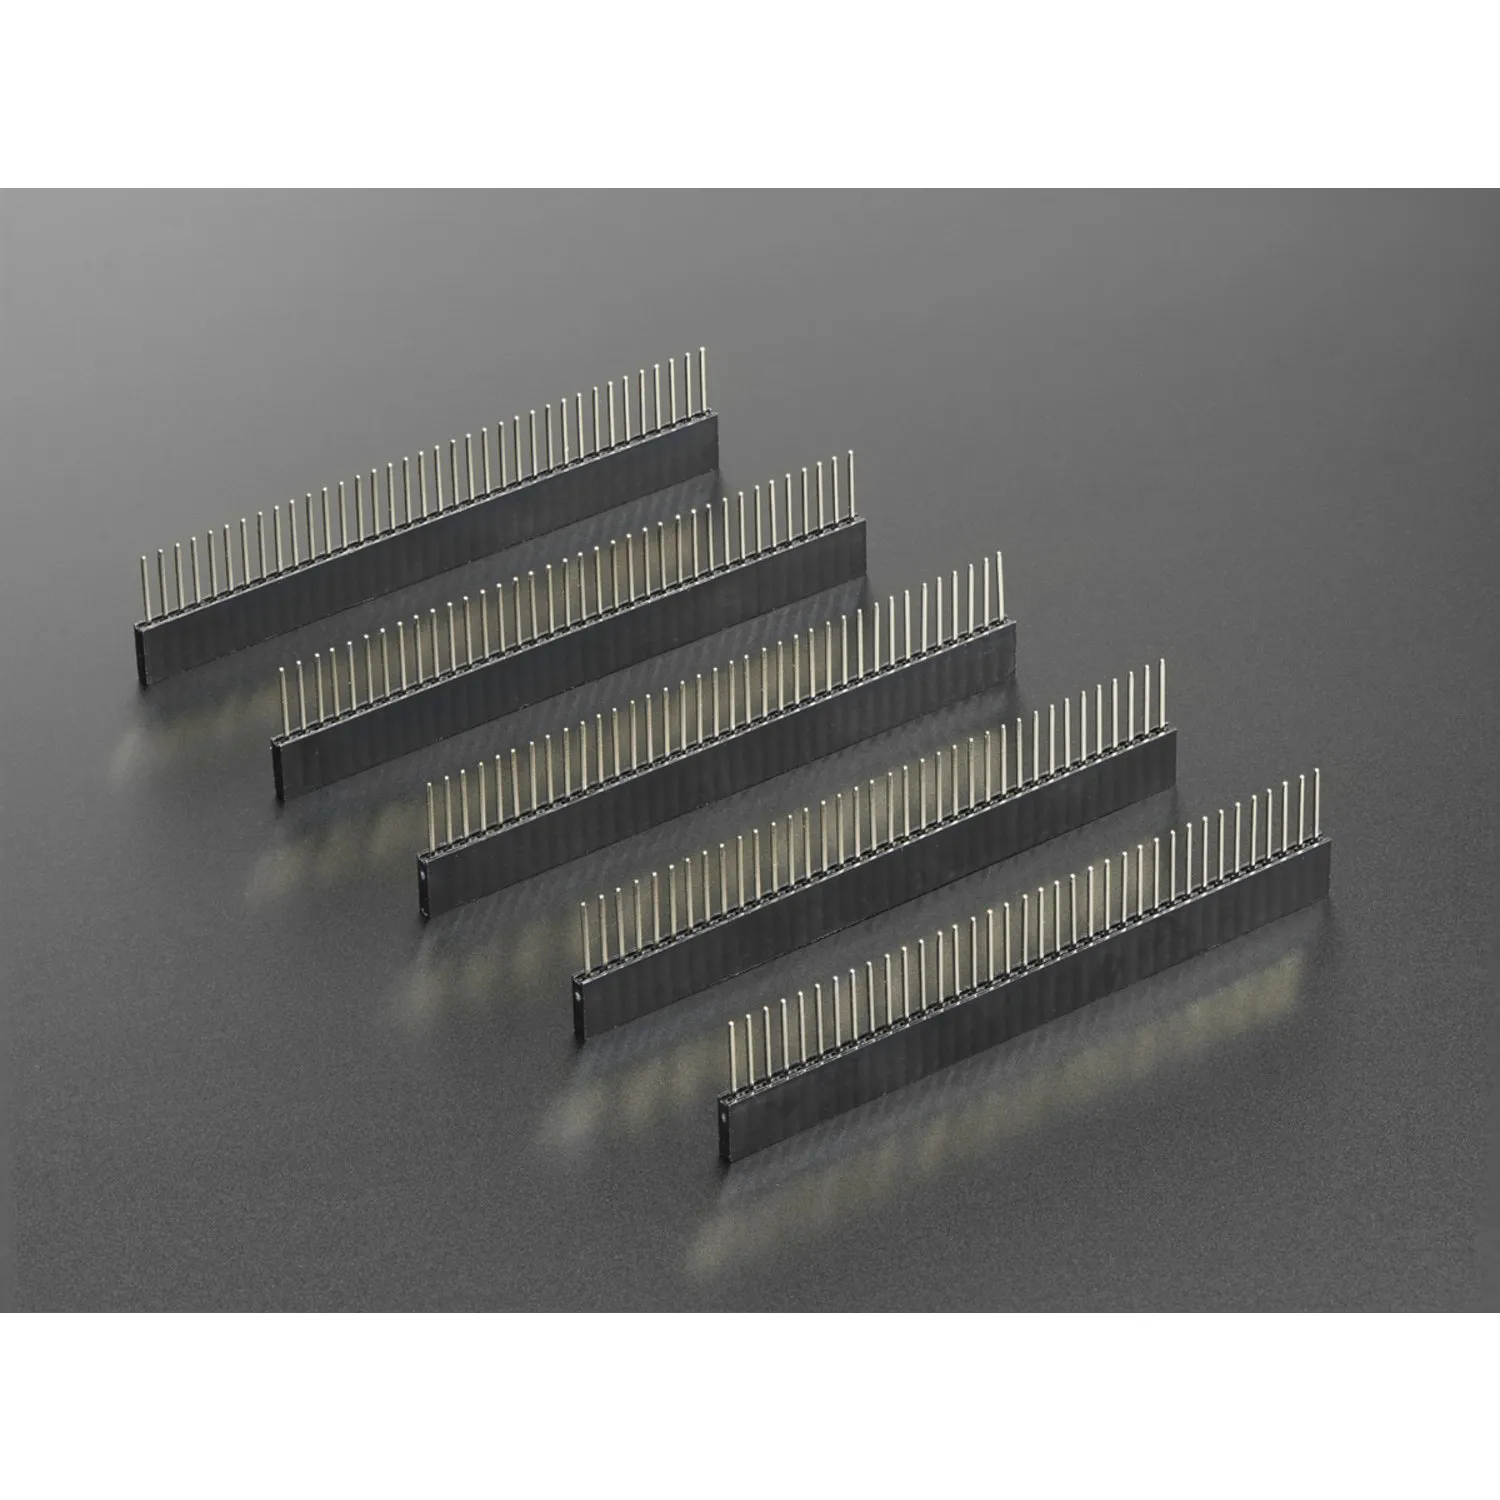 Photo of 36-pin Stacking header - pack of 5!